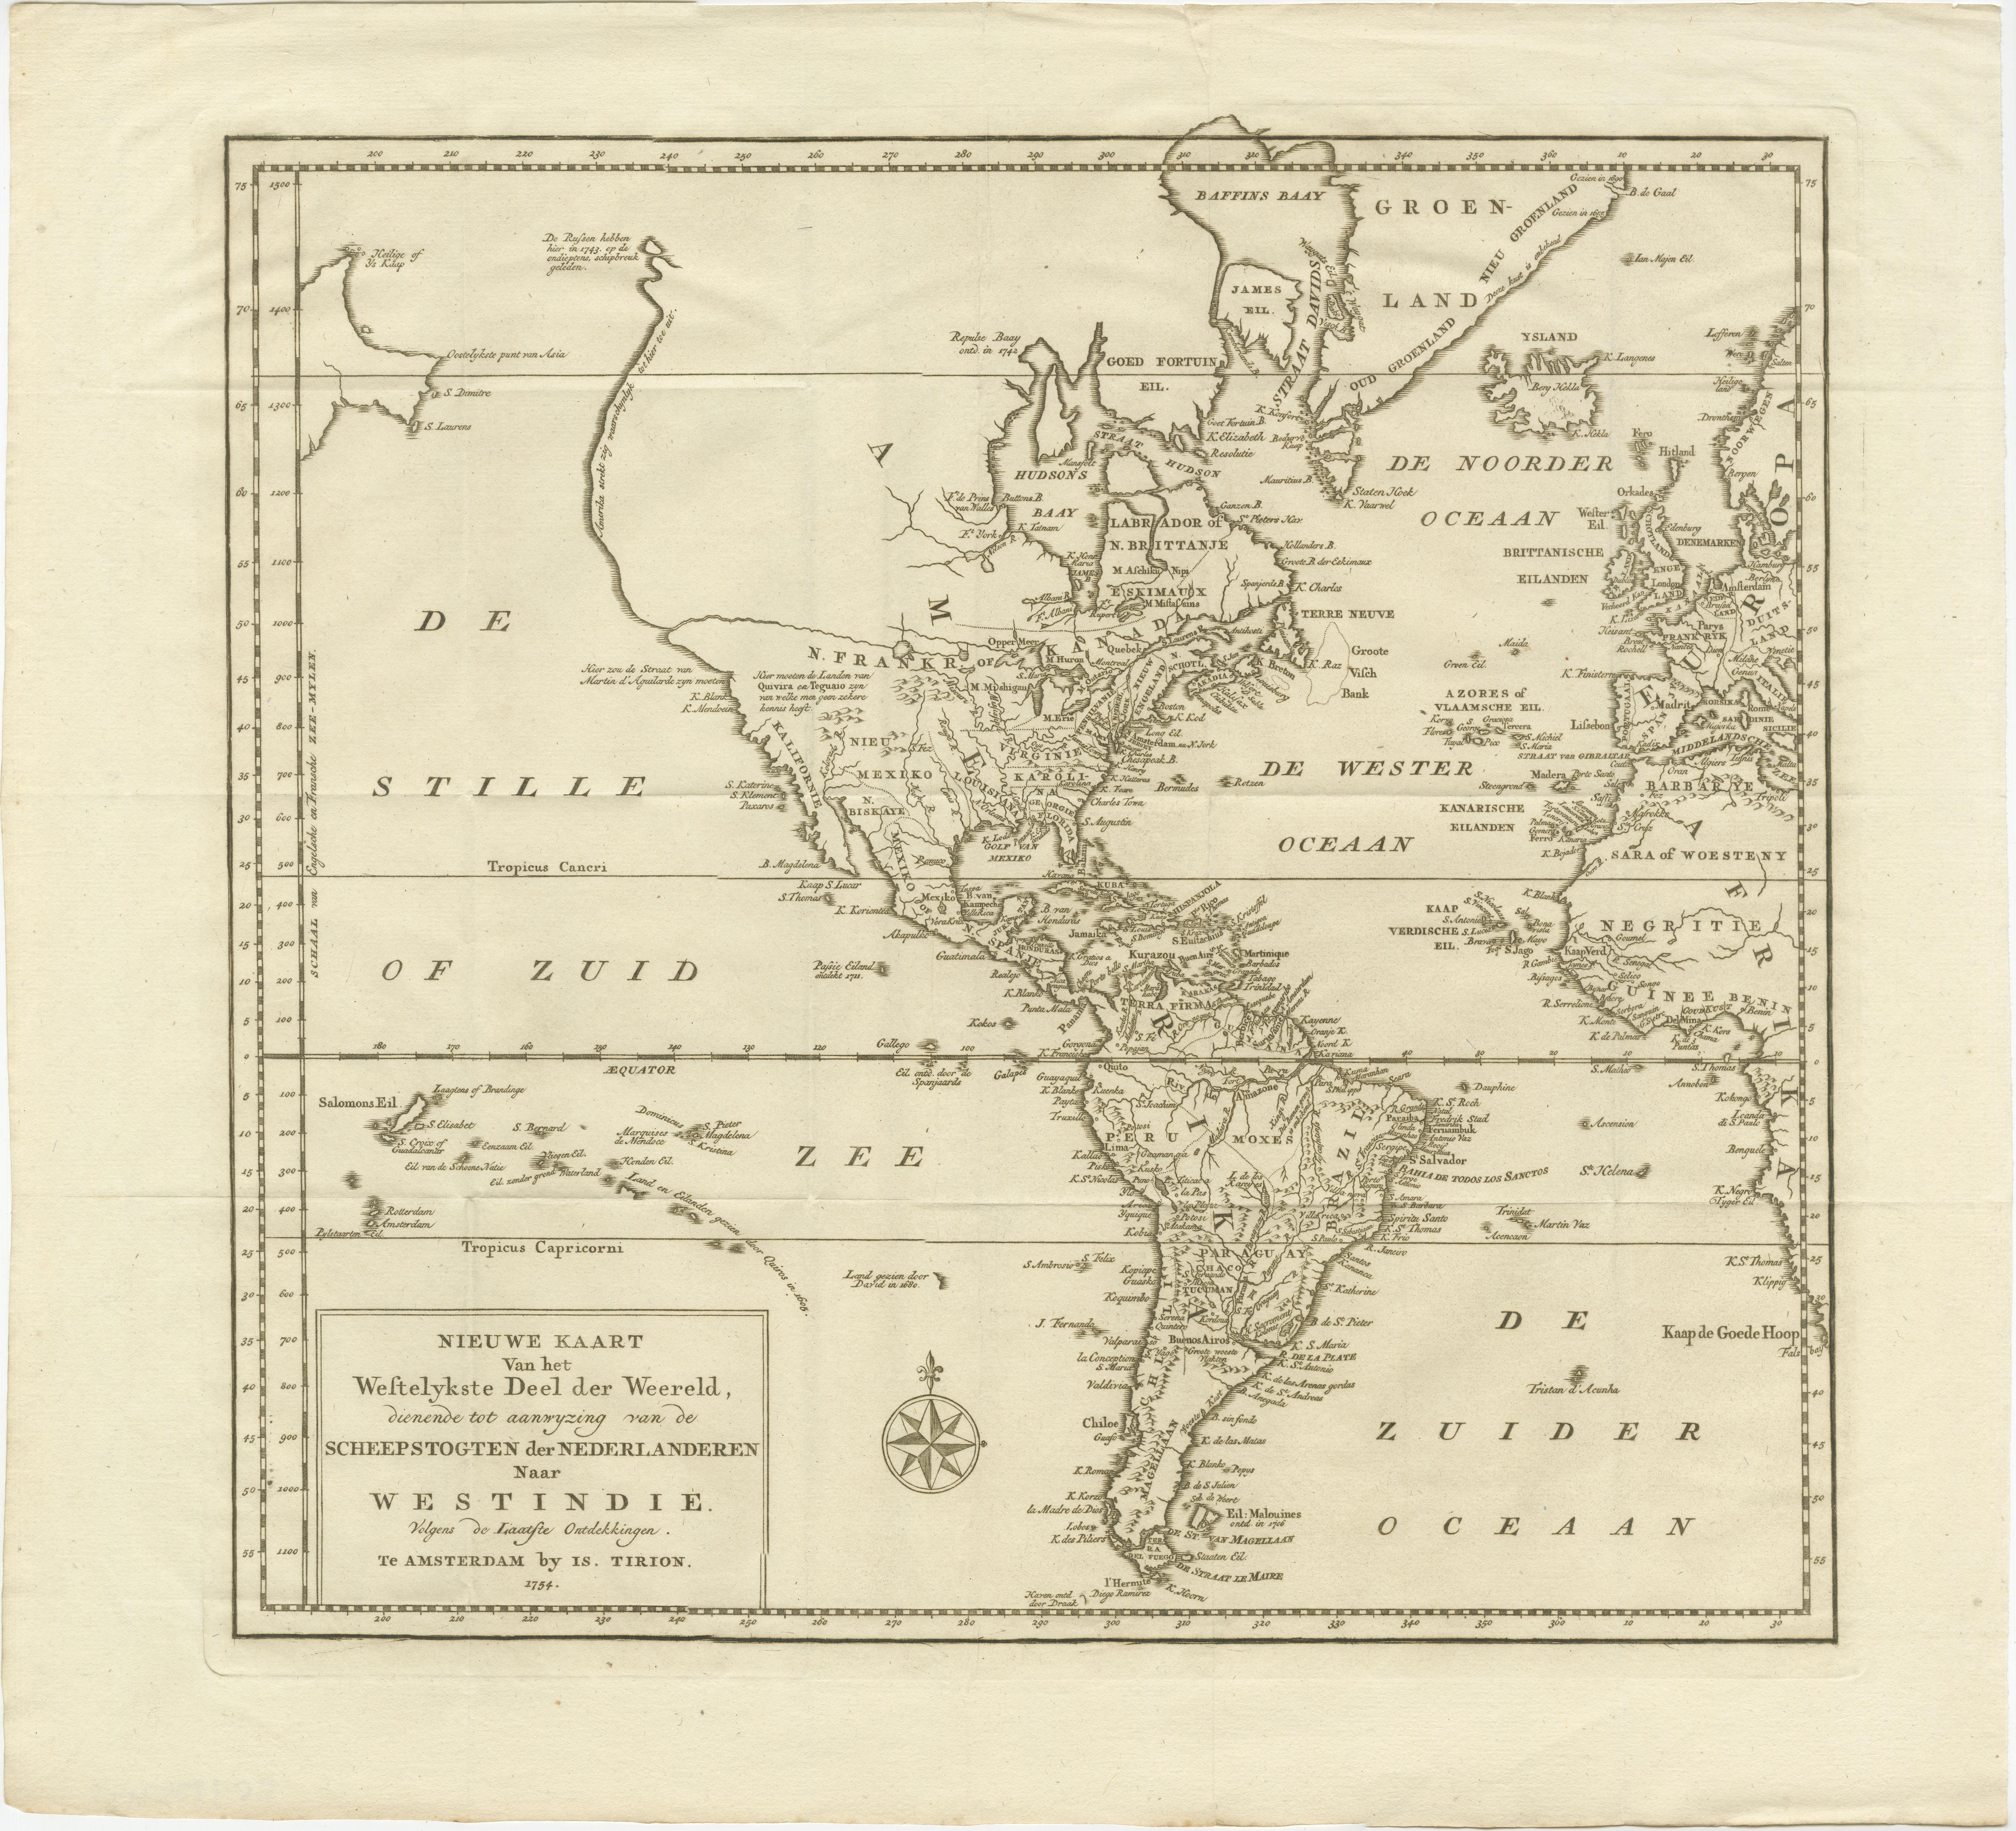 Interesting and Decorative Dutch Antique Map of the Americas 1